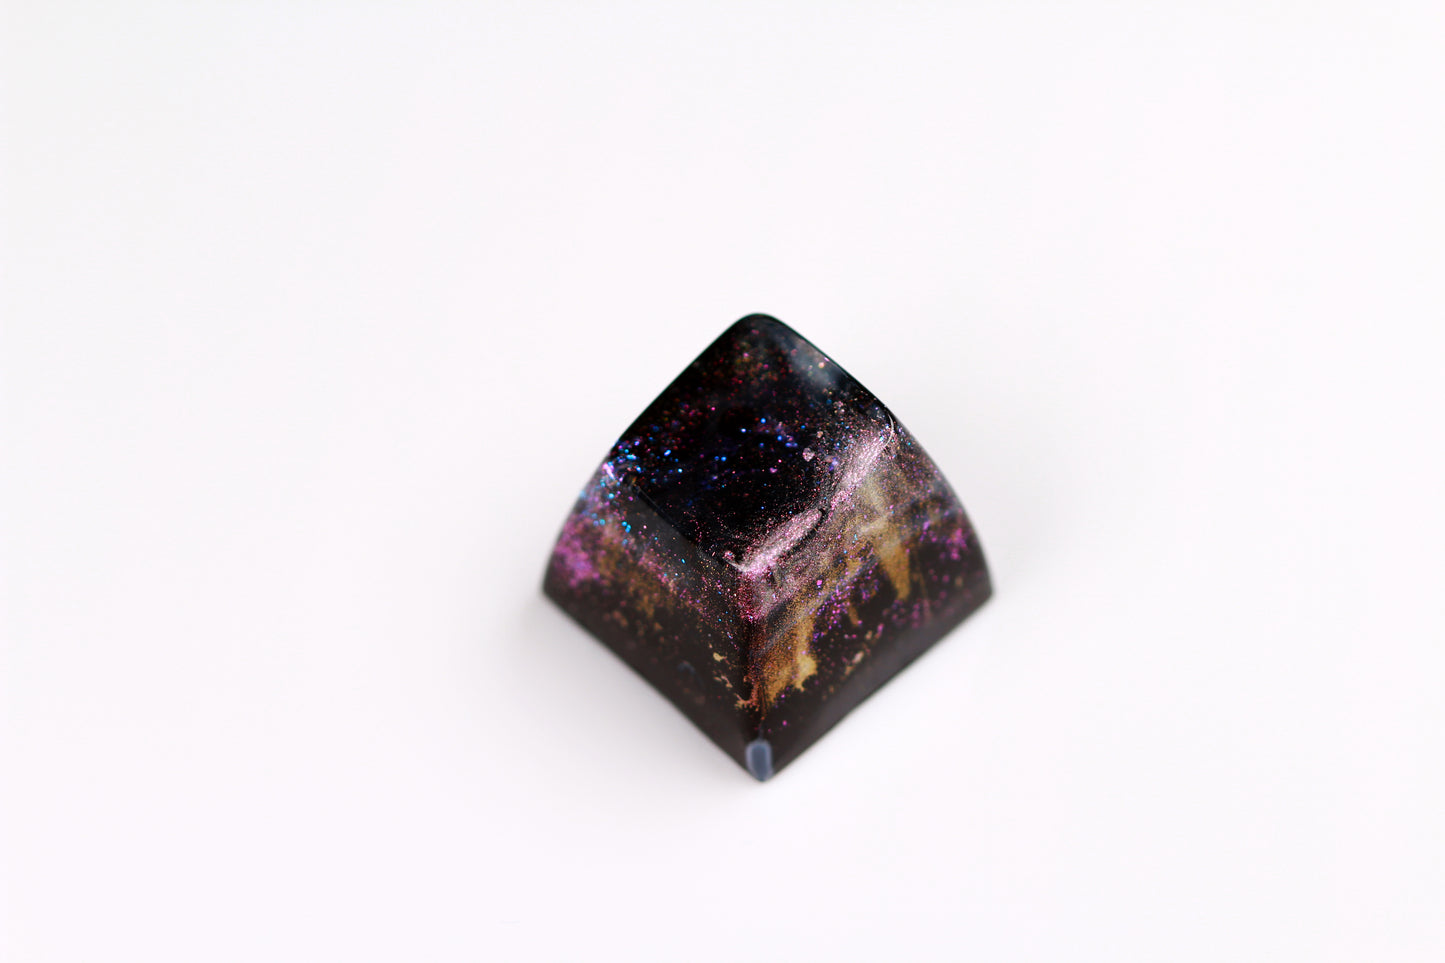 Gimpy SA Row 1 - Deep Field Particle Stream 2 - PrimeCaps Keycap - Blank and Sculpted Artisan Keycaps for cherry MX mechanical keyboards 